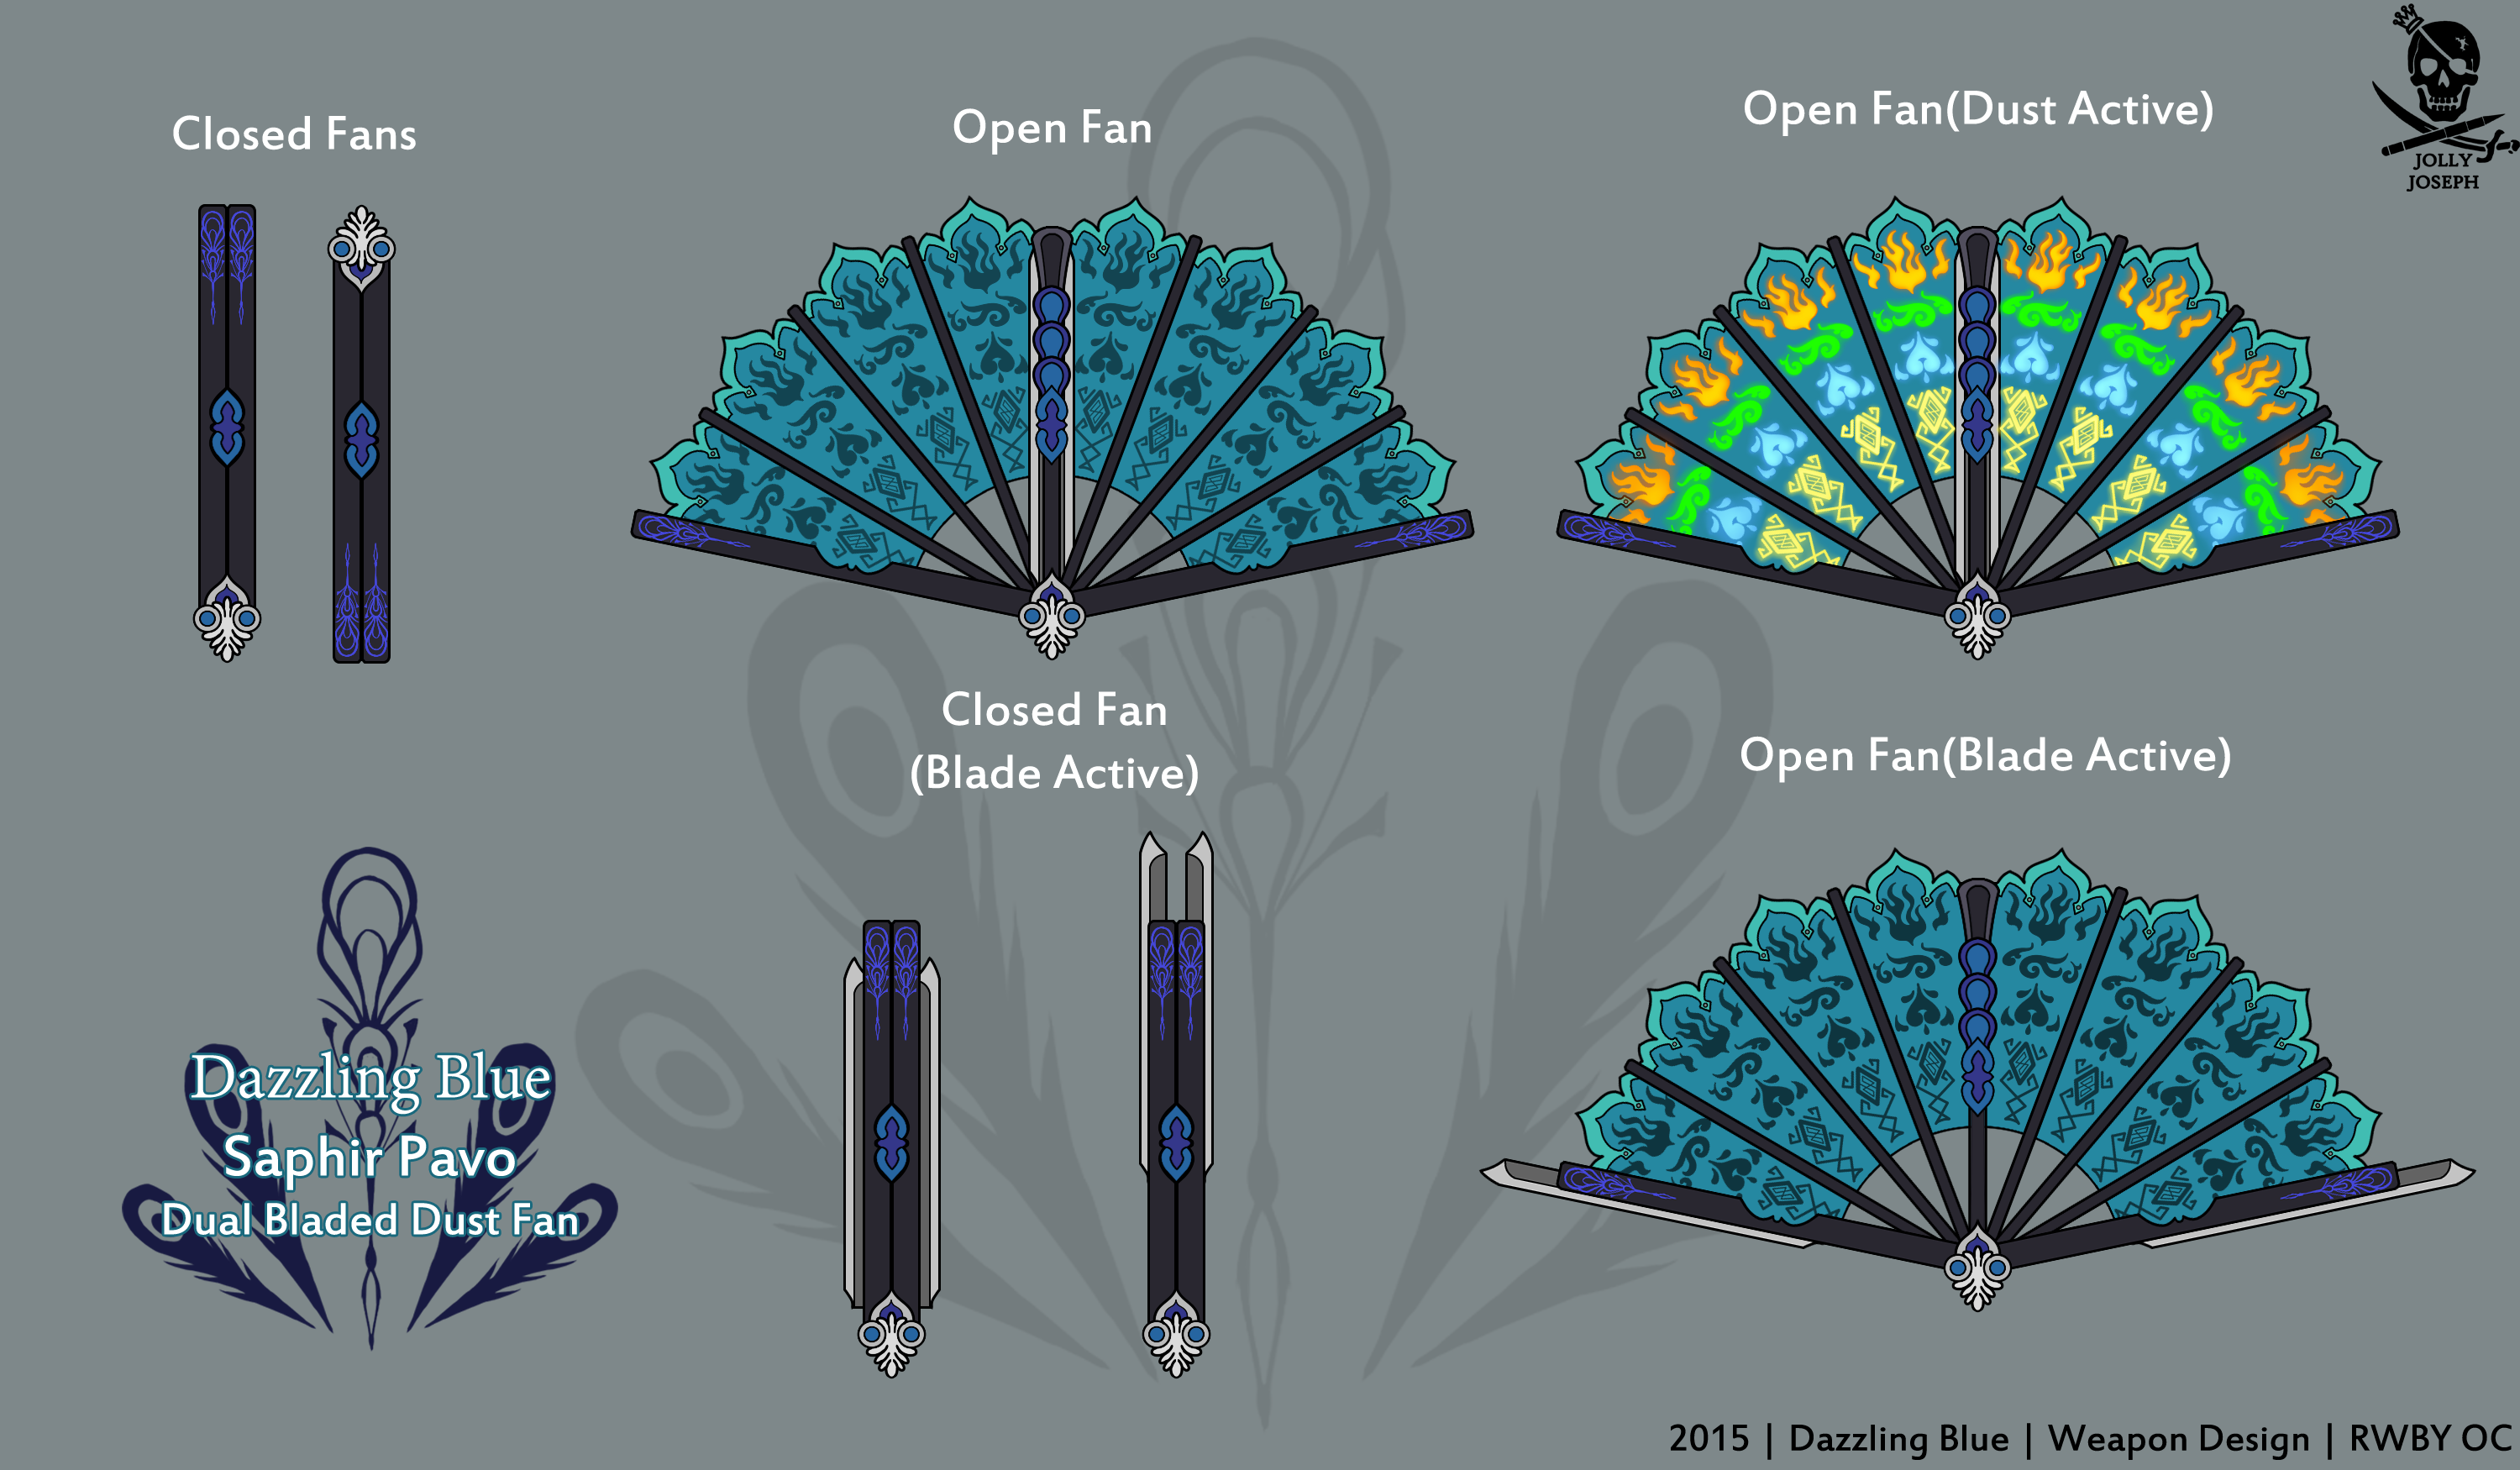 dazzling_blue___saphir_pavo_by_jollyjoseph-d91cnfk.png